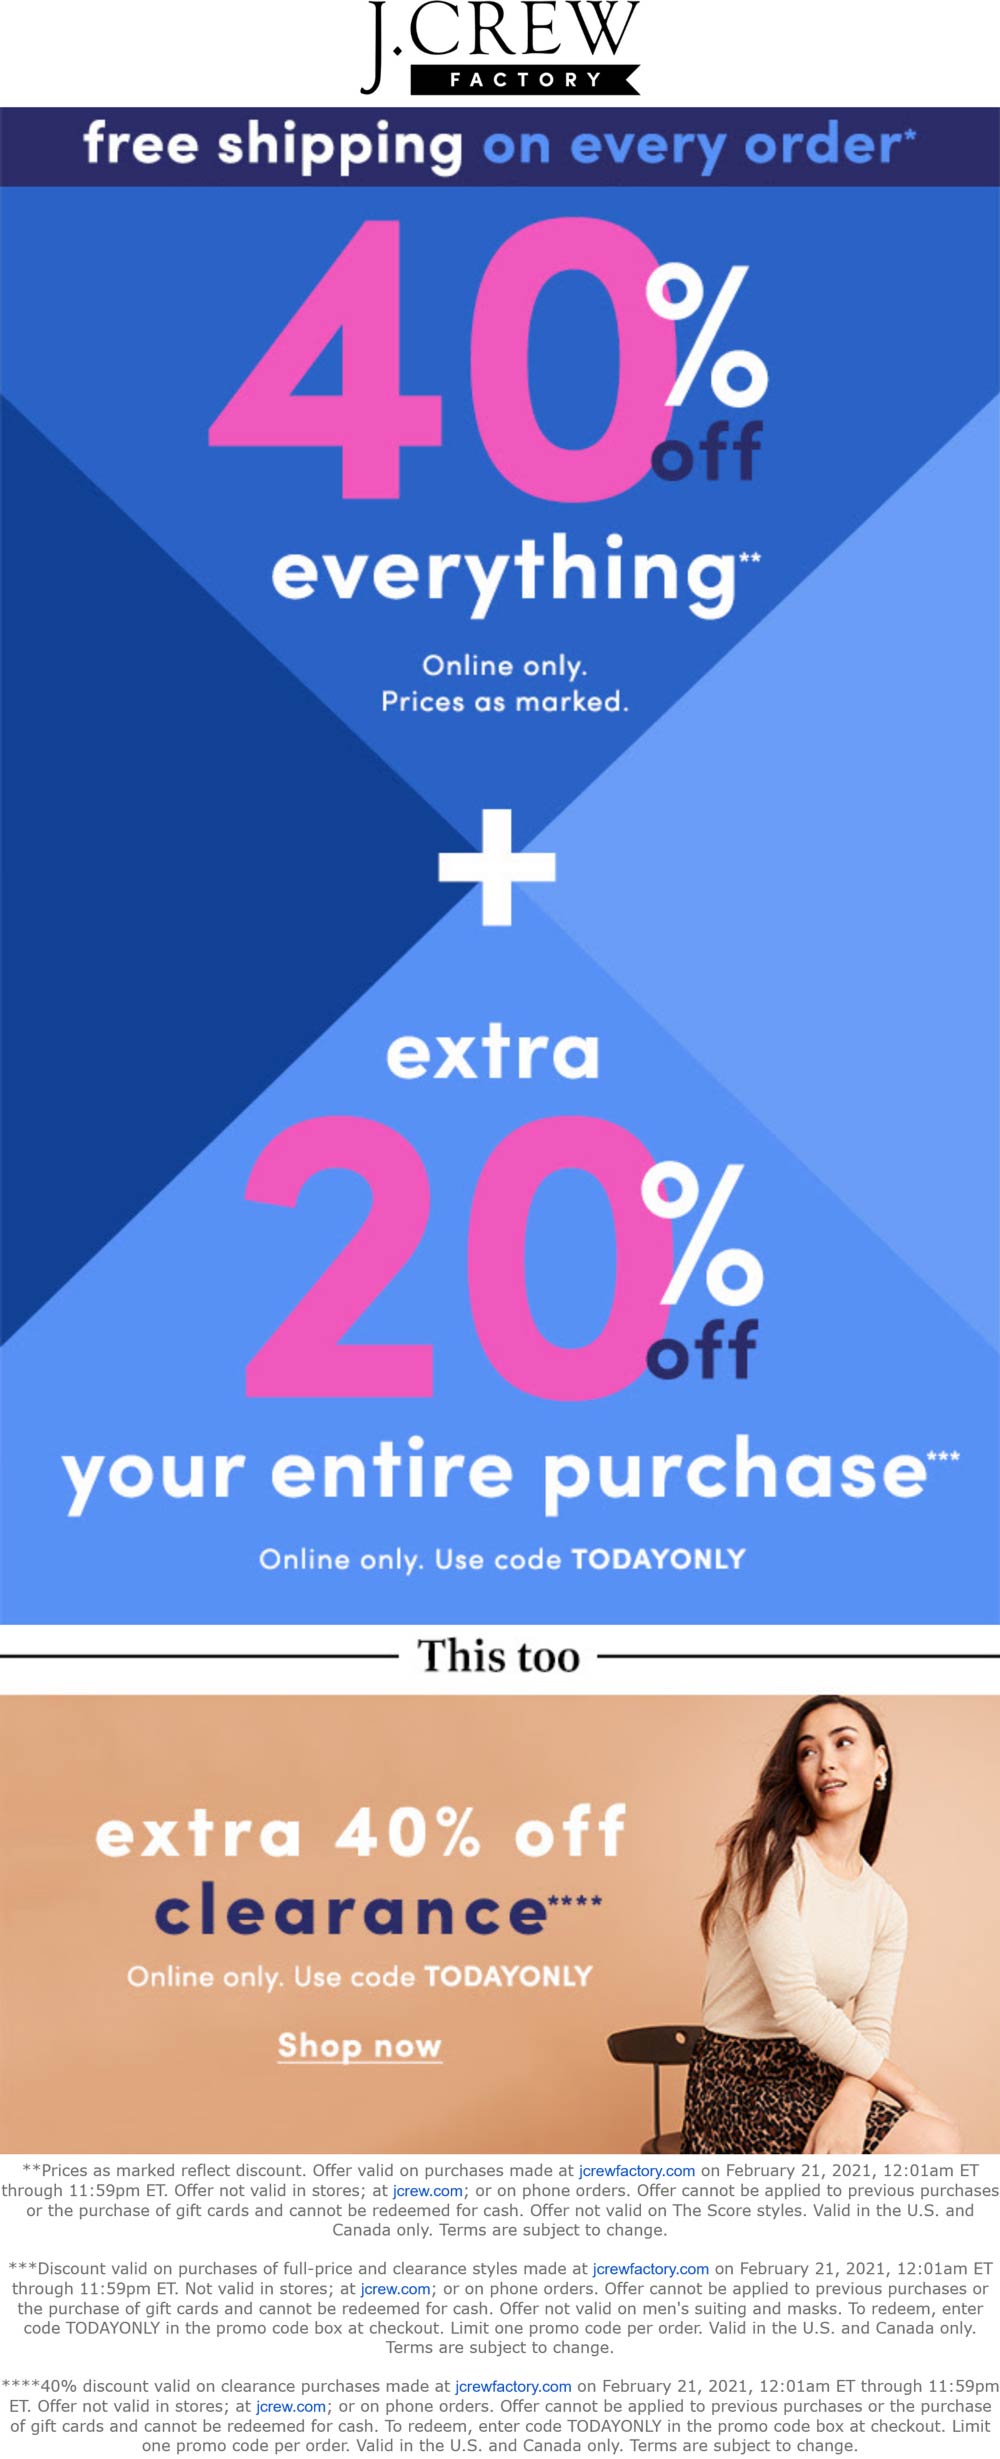 J.Crew Factory stores Coupon  60% off everything online today at J.Crew Factory via promo code TODAYONLY #jcrewfactory 